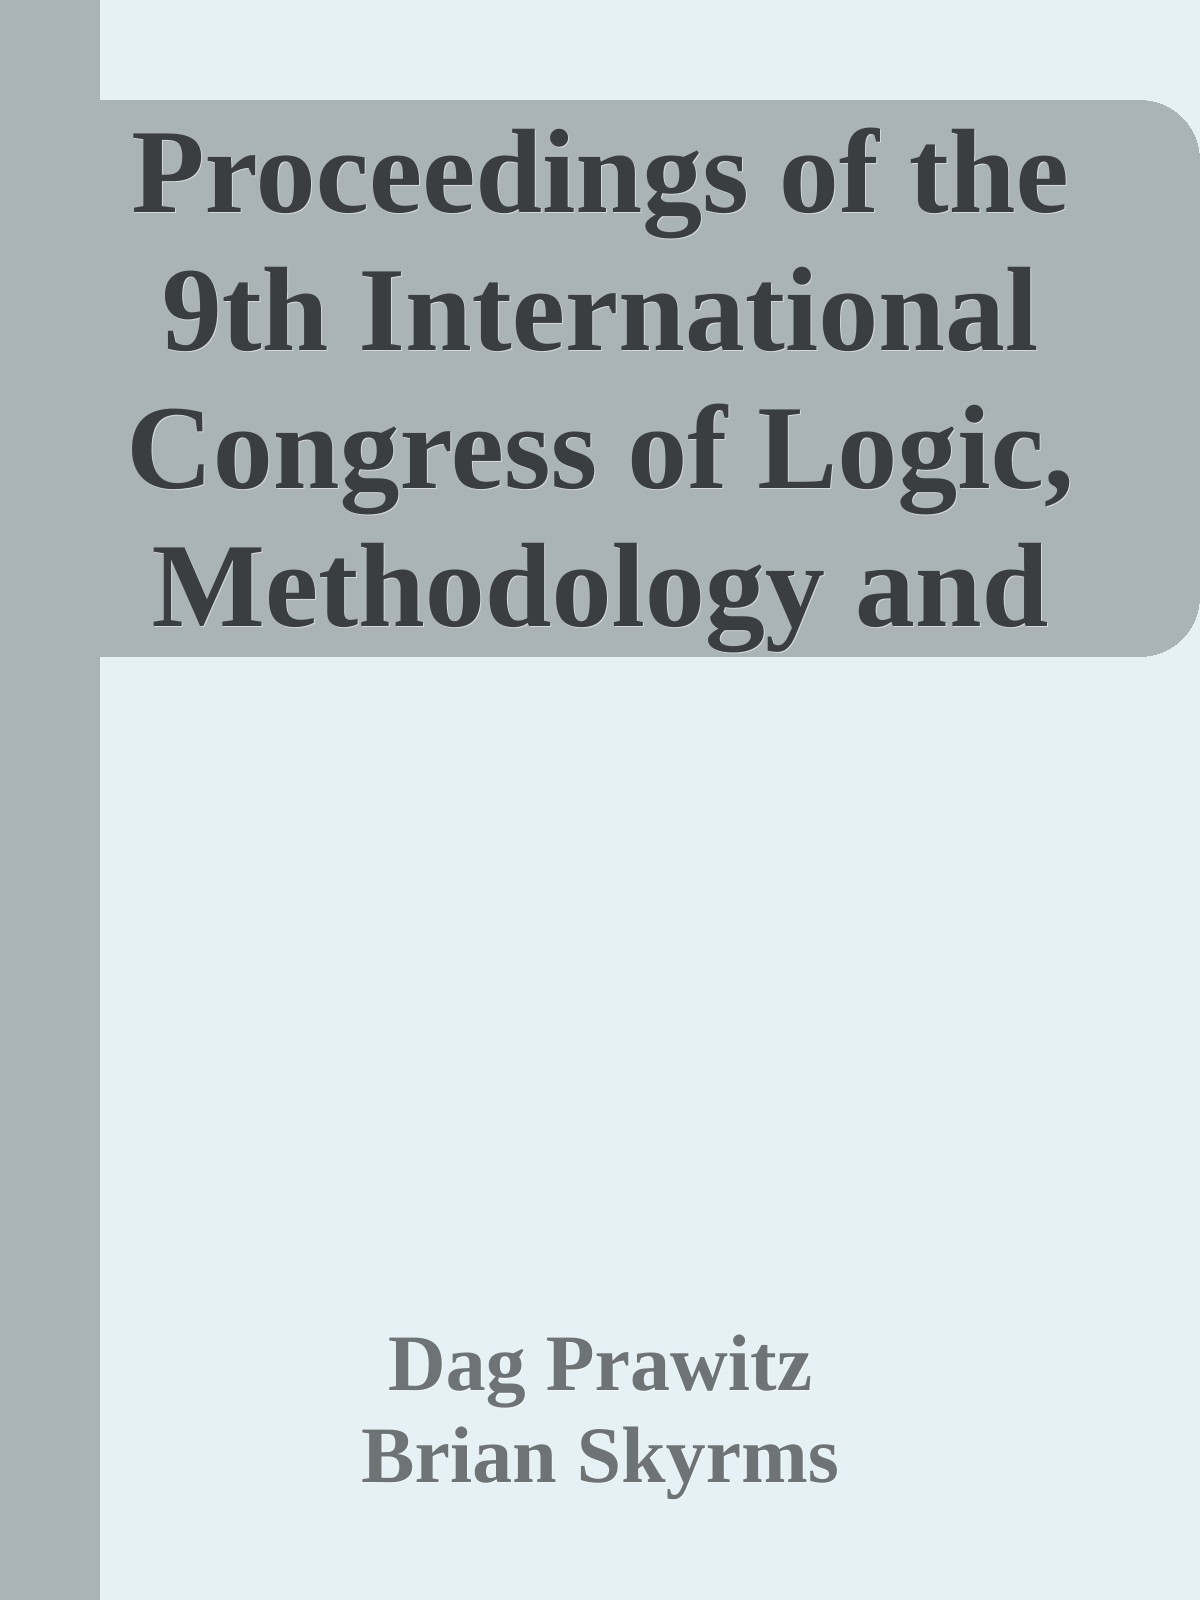 Proceedings of the 9th International Congress of Logic, Methodology and Philosophy of Science 1891 - Proceedings